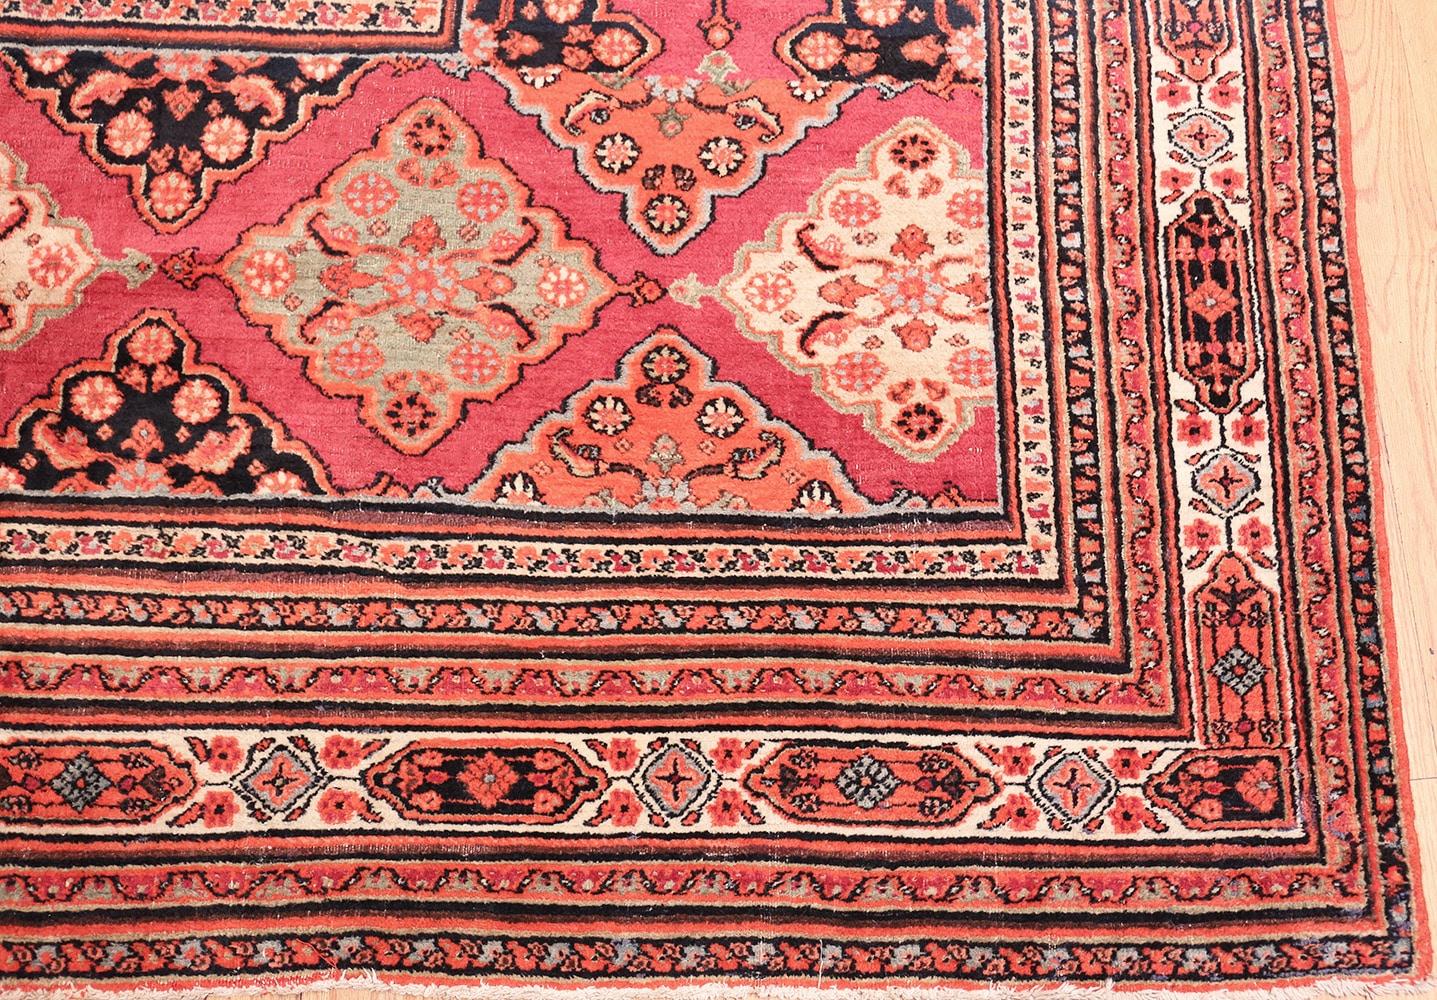 Beautiful and Decorative Open Field Design Antique Persian Khorassan Carpet, Country of Origin: Persia, Circa Date: Late 19th Century. Size: 11 ft 9 in x 16 ft 3 in (3.58 m x 4.95 m)

